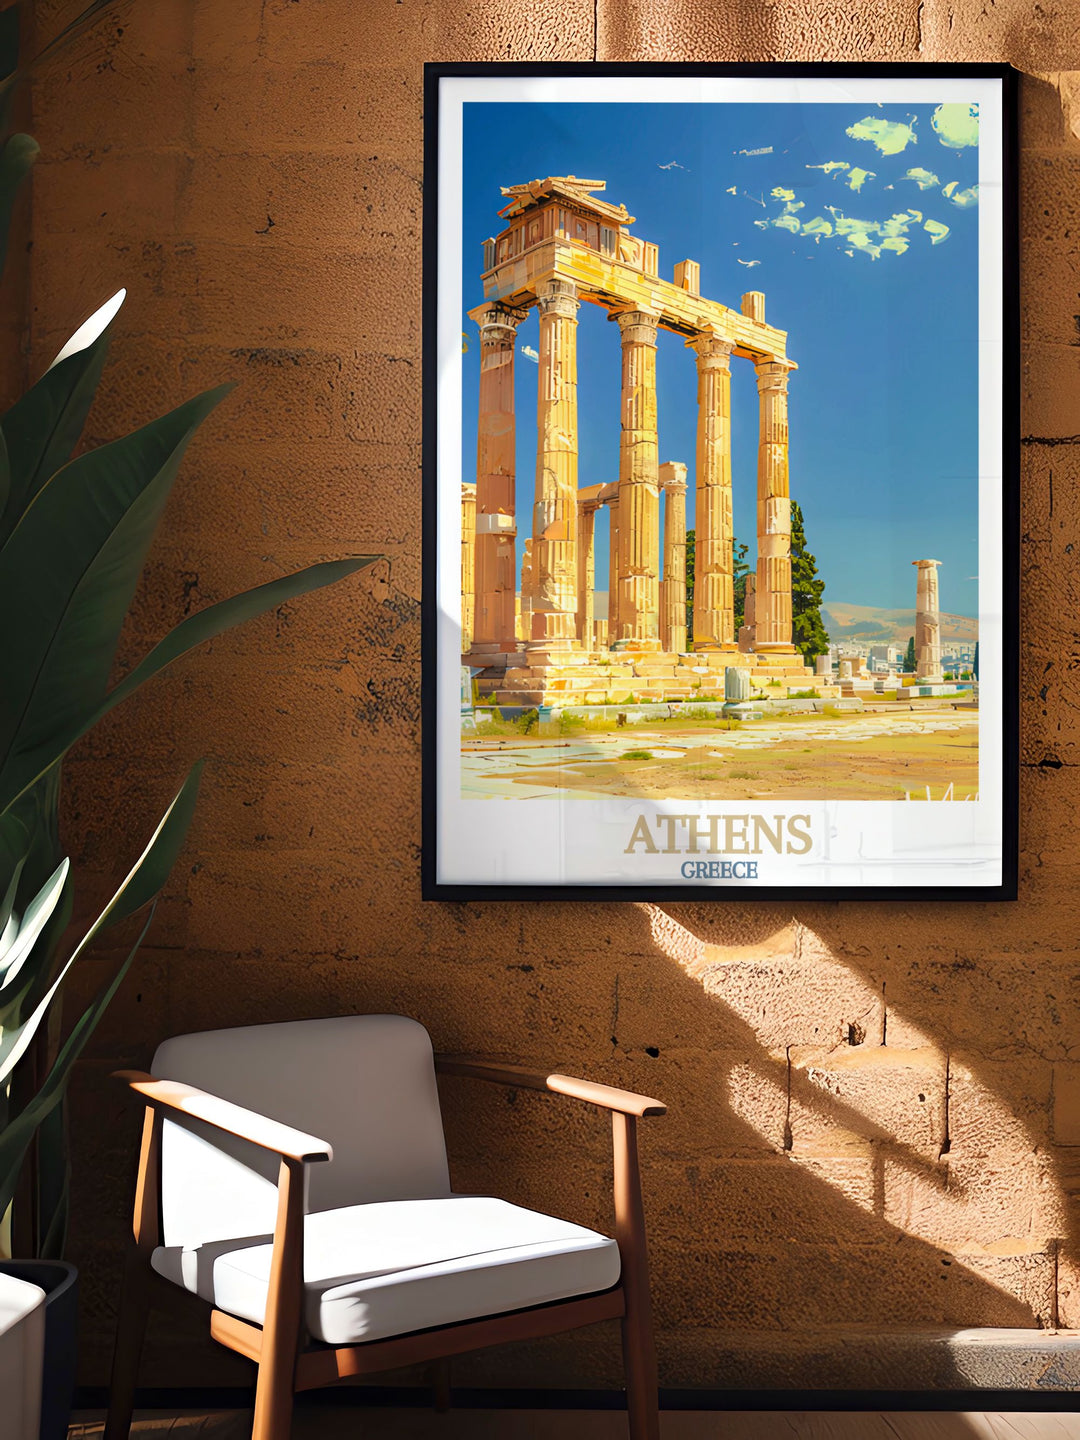 Black and white city print of Athens Georgia featuring The Temple of Olympian Zeus. This art print is perfect for anyone looking to add sophisticated decor to their home or seeking special gifts for loved ones.